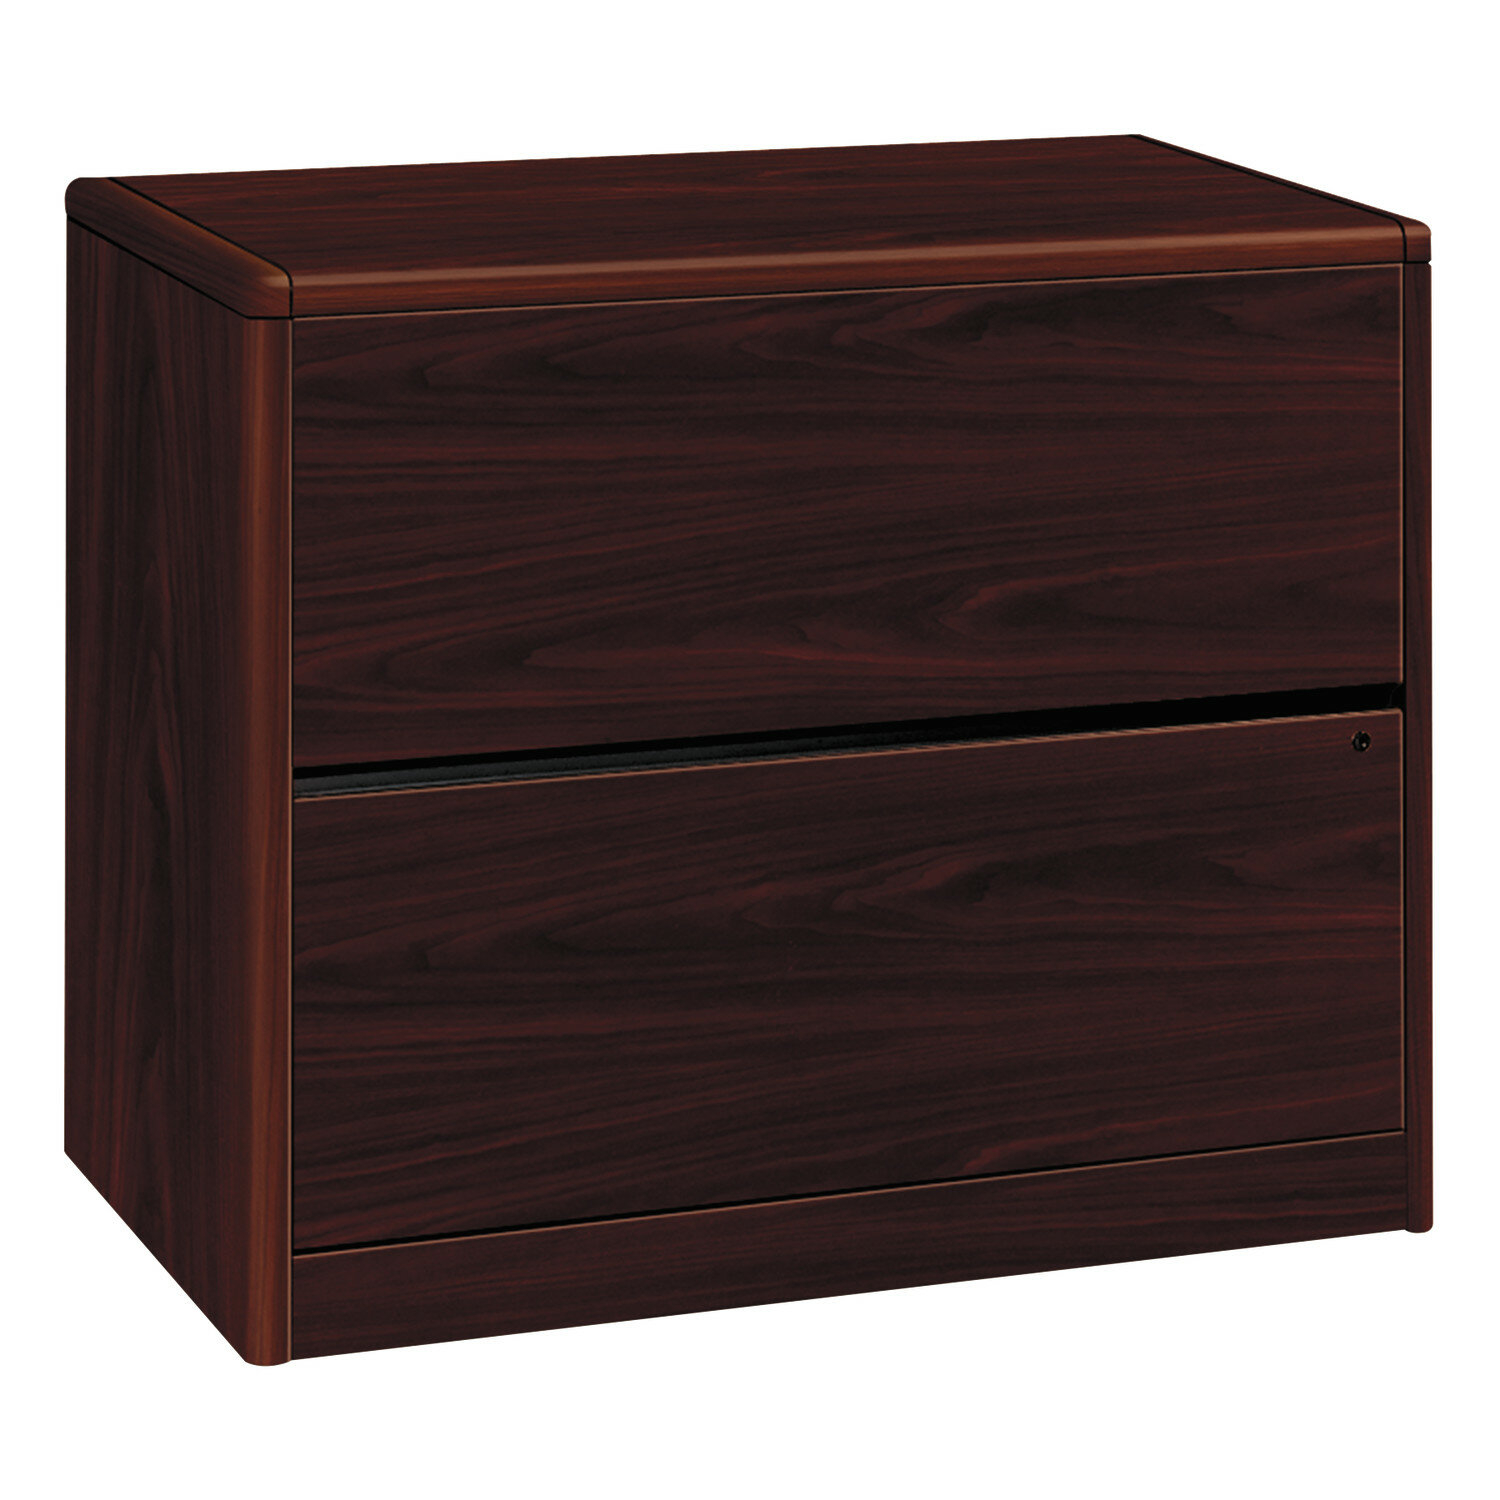 Hon 10700 Series 2 Drawer Lateral Filing Cabinet Wayfair in proportions 1500 X 1500